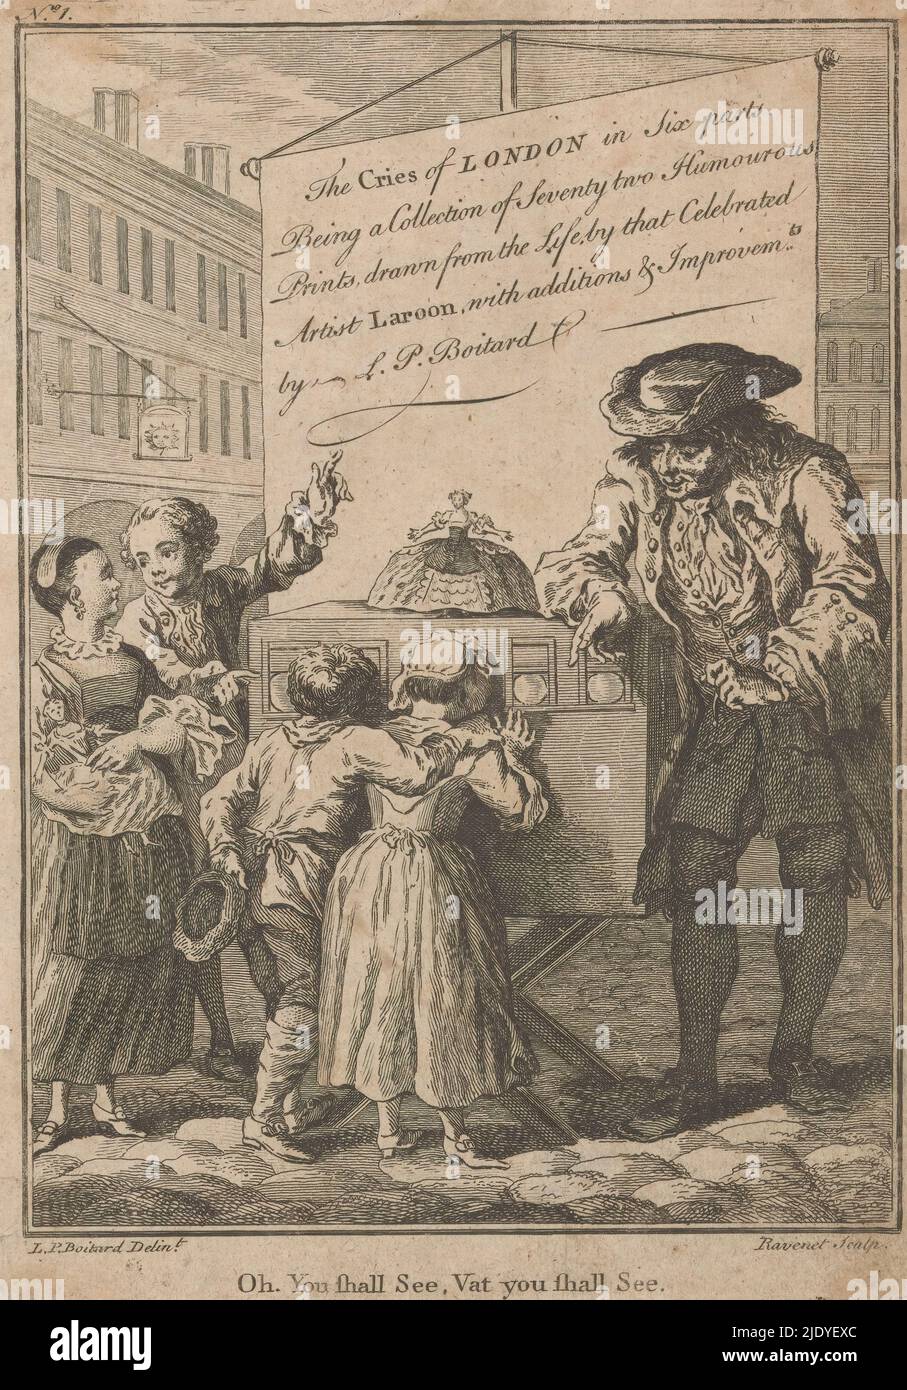 Four children around a viewing box, Street vendors in London (series title), Cries of London in six parts (series title on object), Representation of a square with four children around a viewing box, two of them peering in through the window. On the viewing box is a doll wearing a dress, next to it the owner of the box pulling a cord., print maker: Simon François Ravenet (le vieux), (mentioned on object), after design by: Louis Philippe Boitard (père), (mentioned on object), after design by: Marcellus Laroon (I), (mentioned on object), London, c. 1760, paper, etching, height 245 mm × width 180 Stock Photo